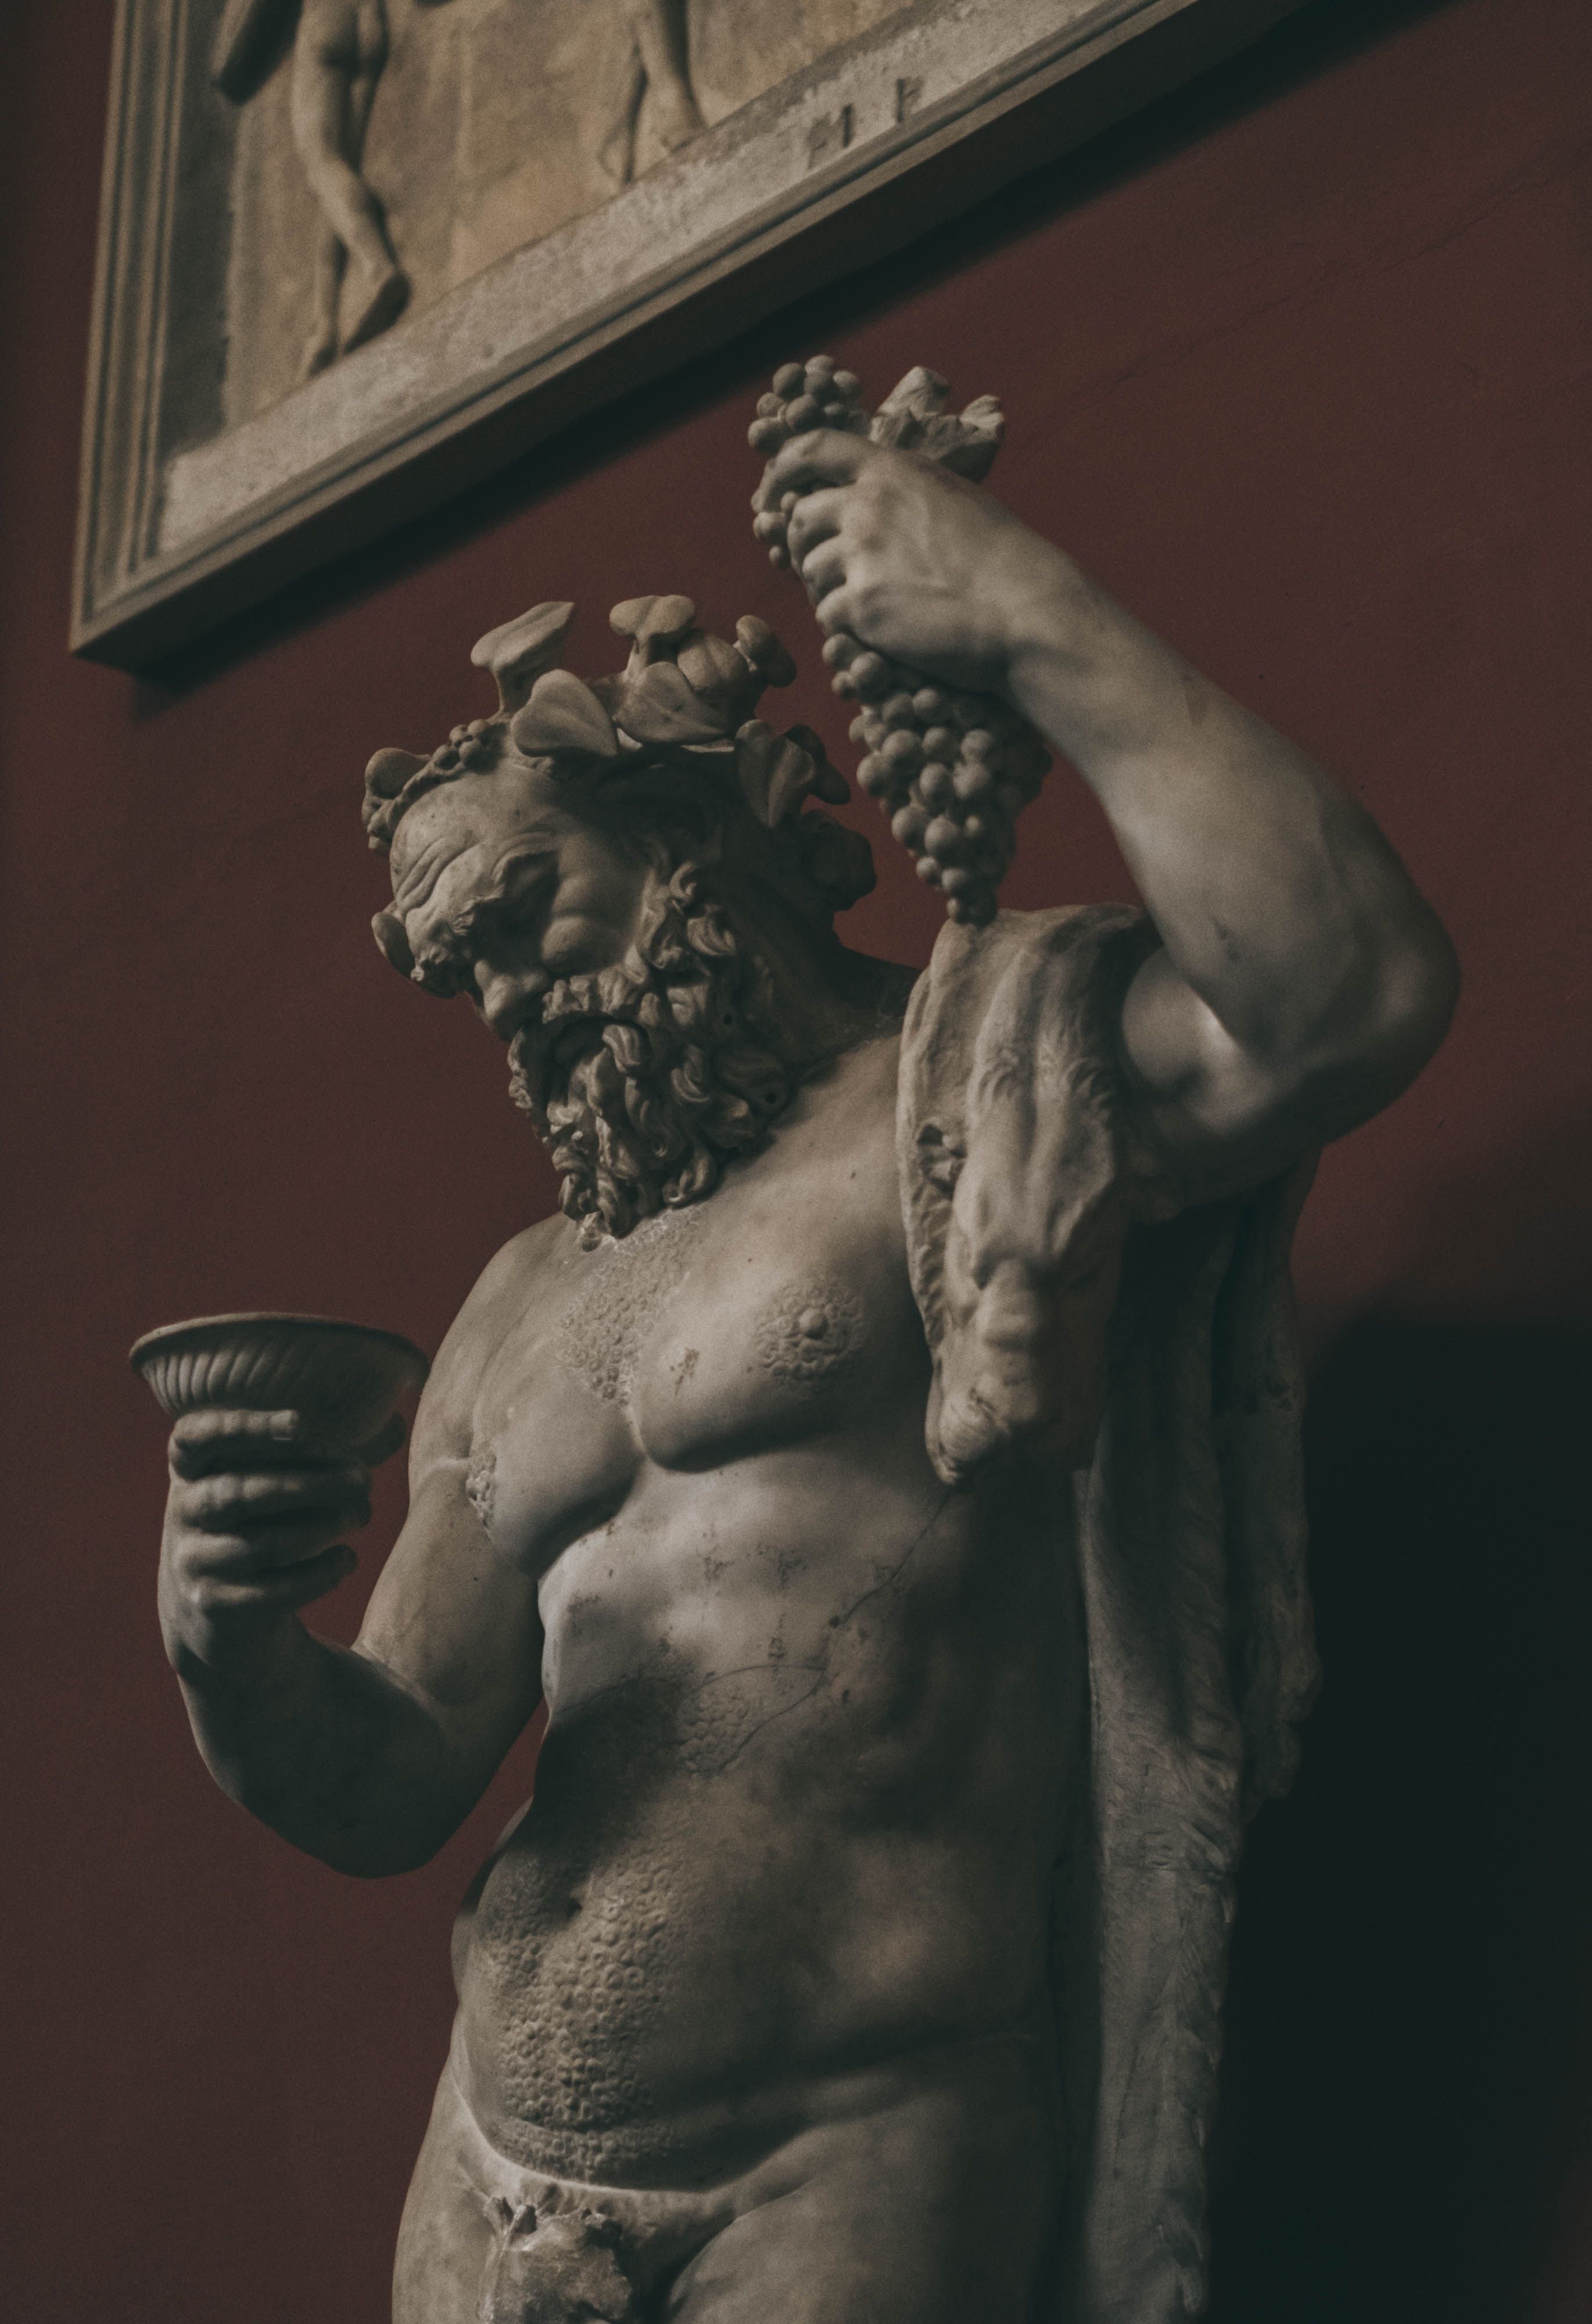 A statue of a man holding grapes and a bowl. - Greek statue, Greek mythology, statue